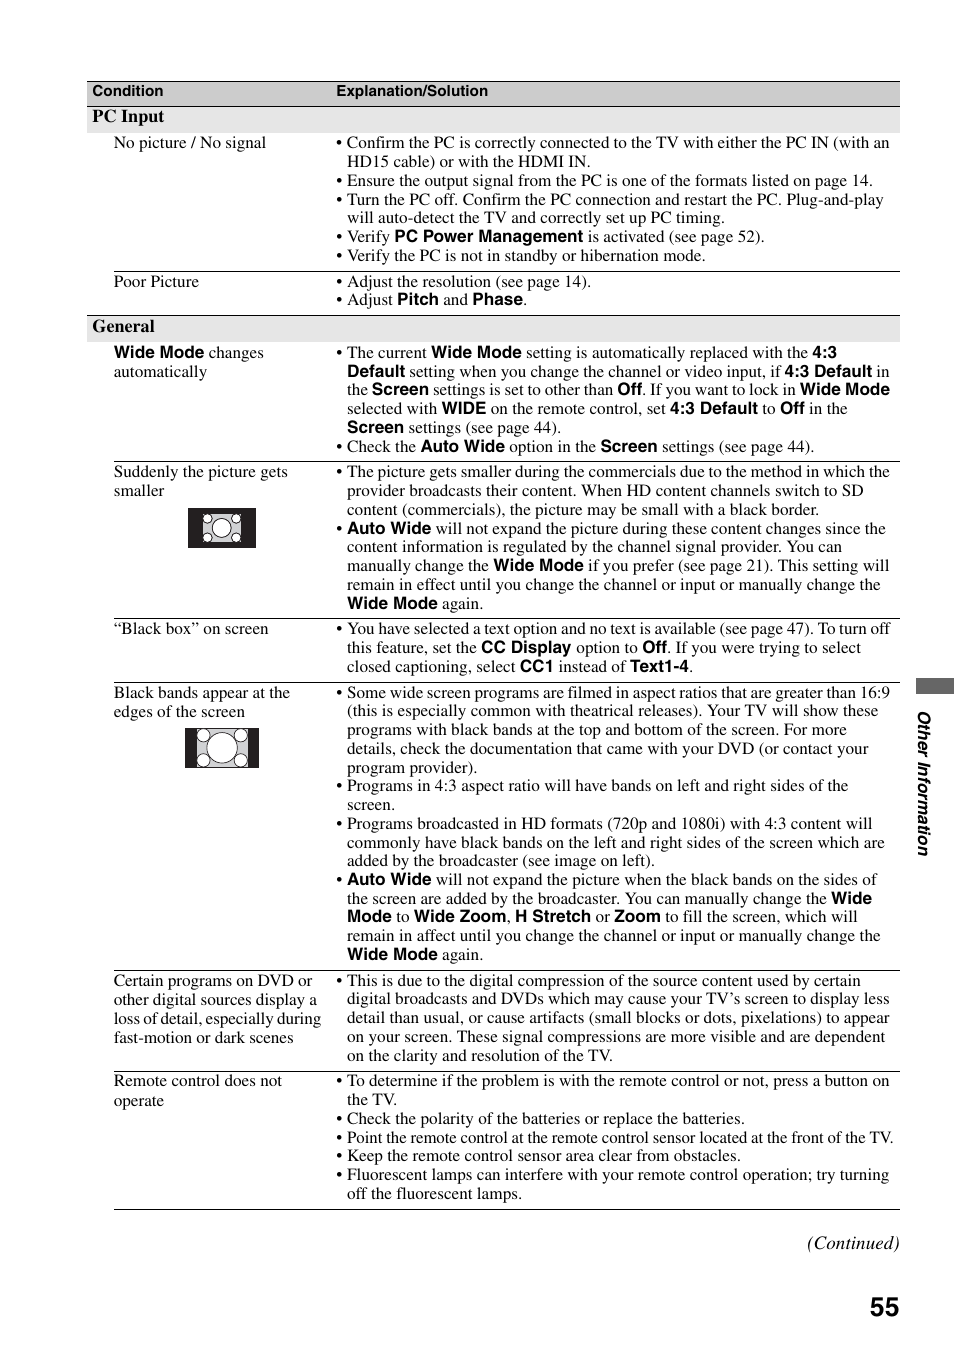 Sony KDL-52XBR7 User Manual | Page 55 / 60